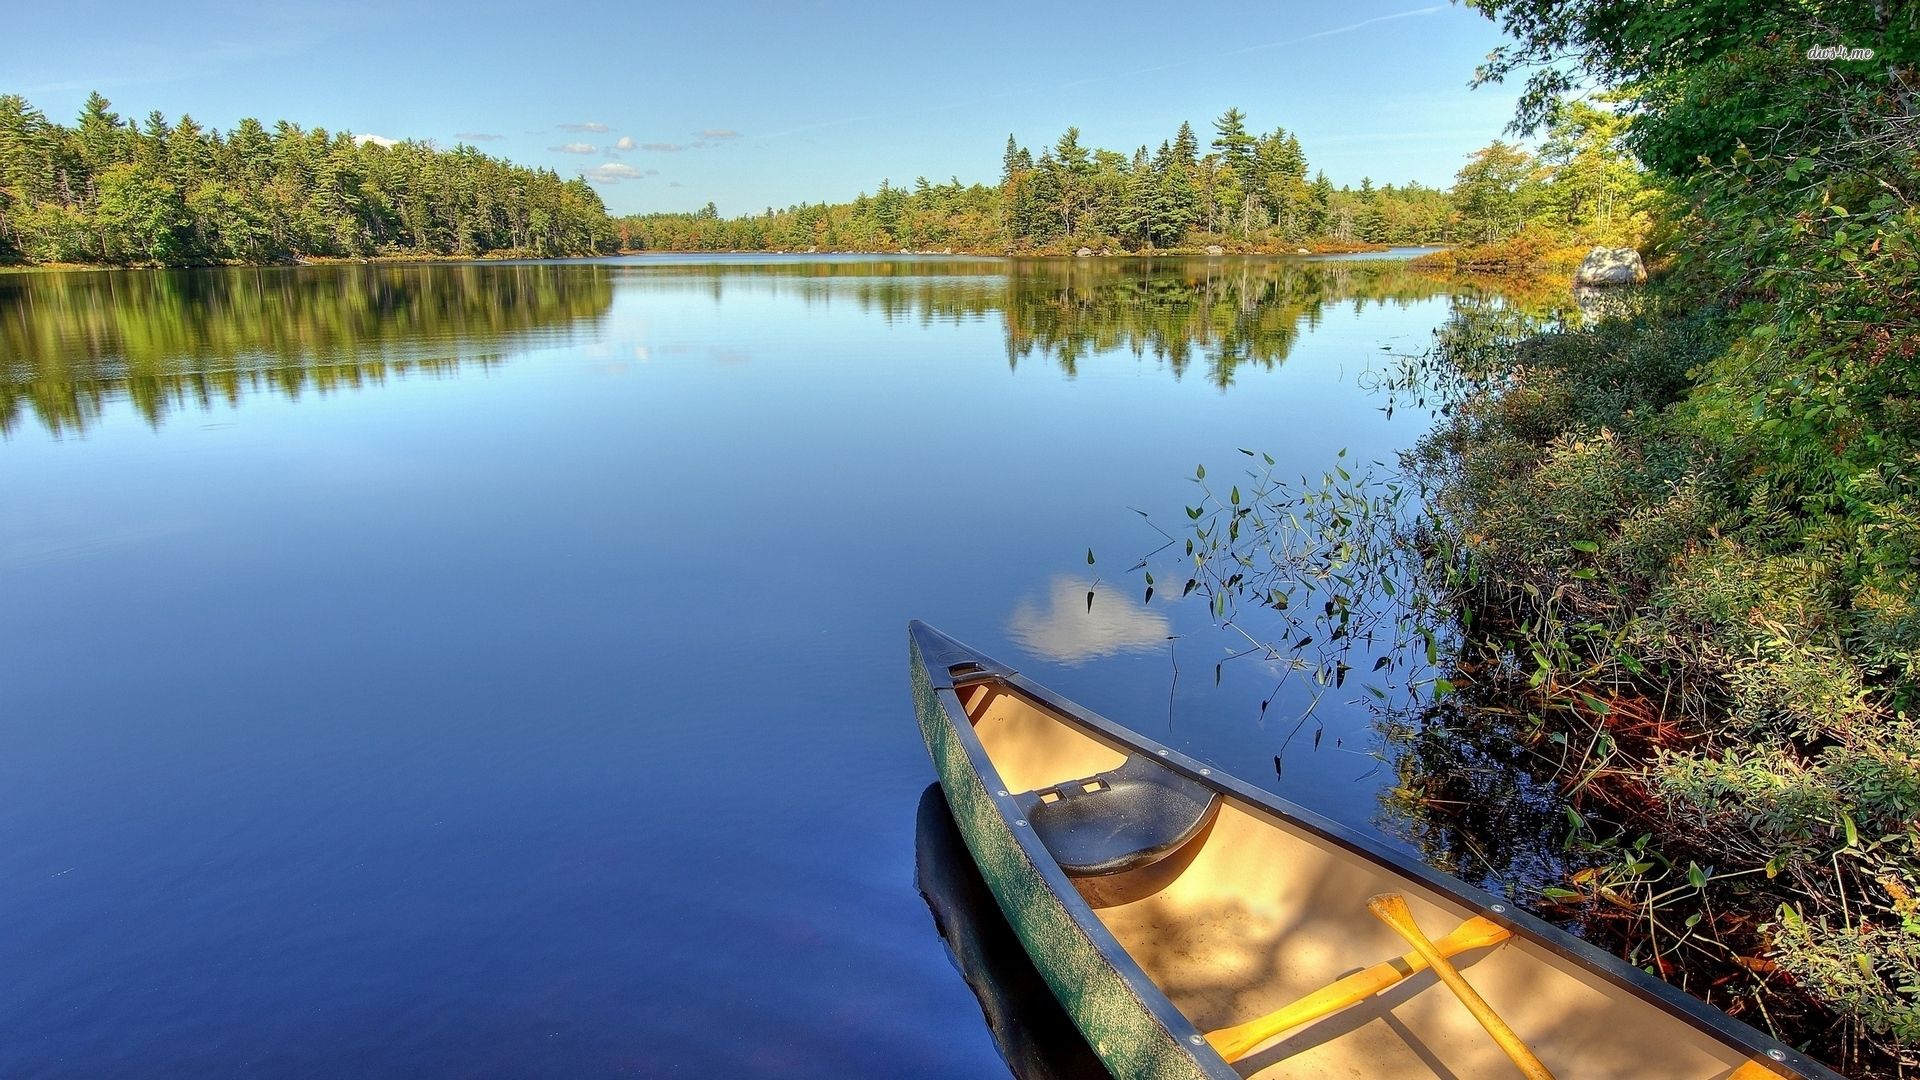 Canoe On A Peaceful Lake Surrounded By Forests Wallpaper, Download